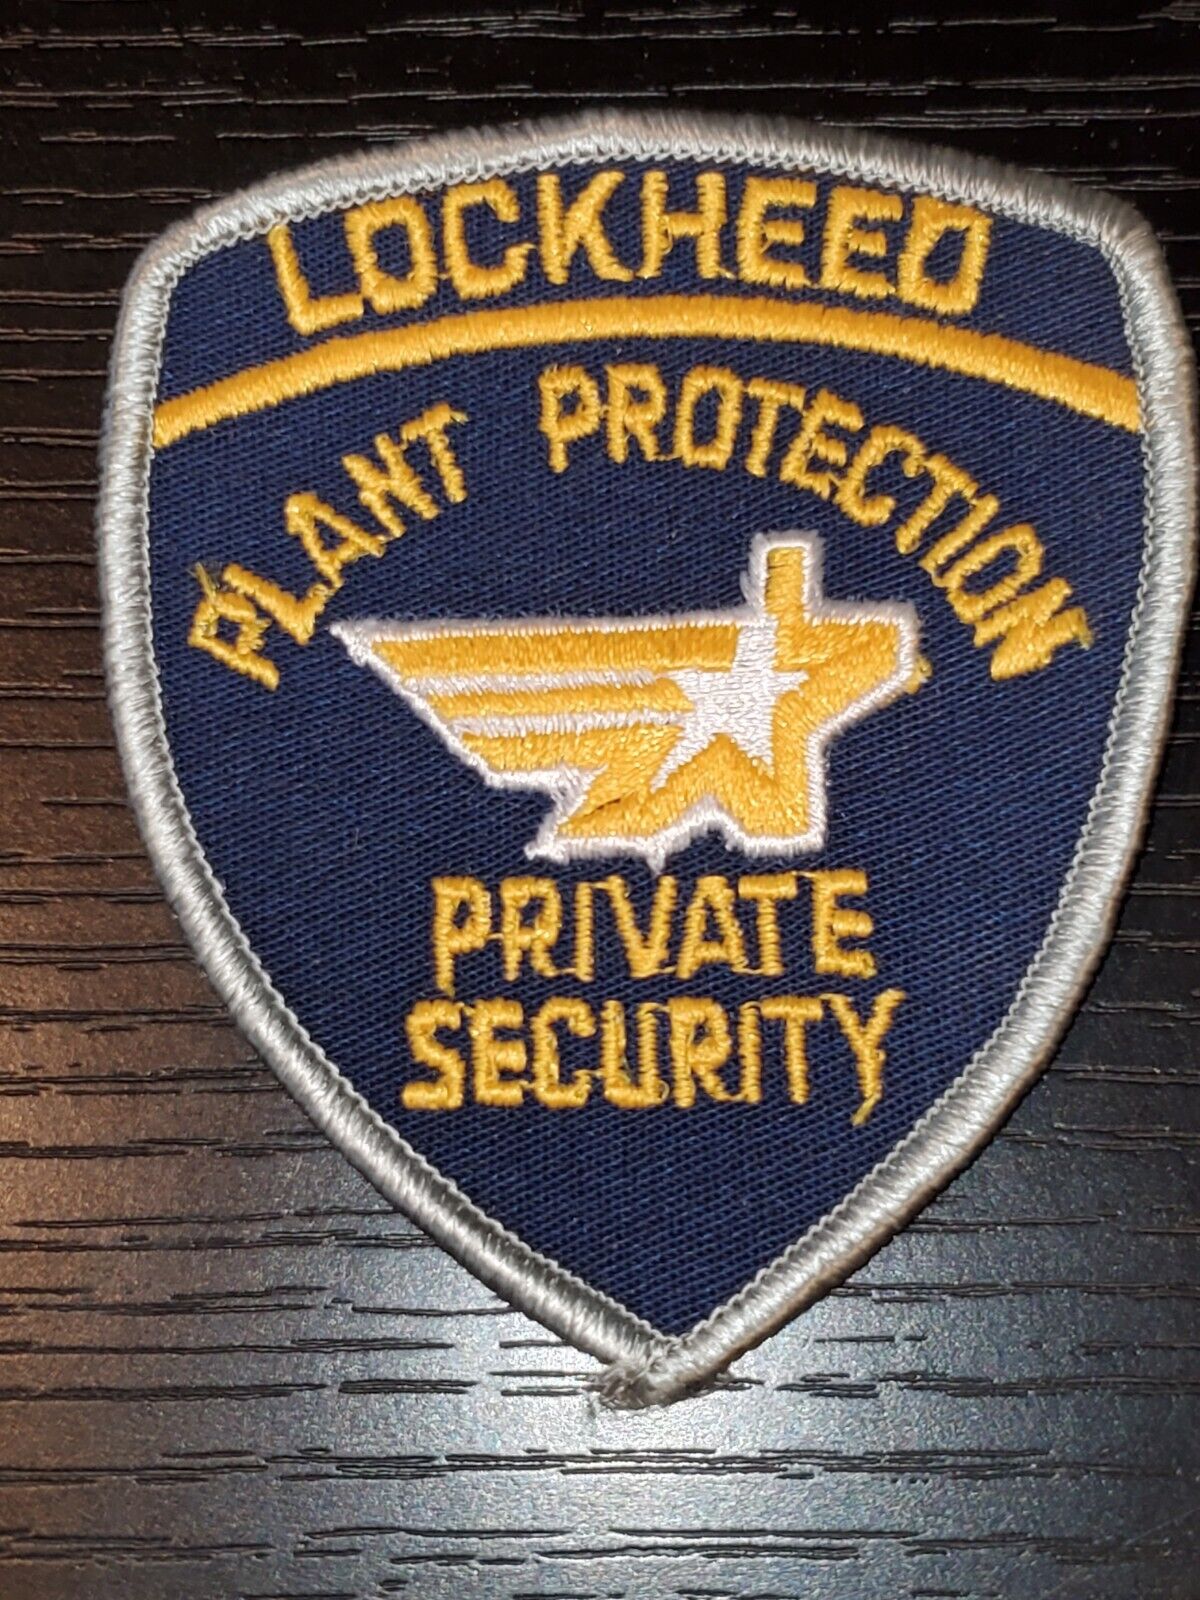 1960s US Army MP Military Police Lockheed Security Patch L@@K